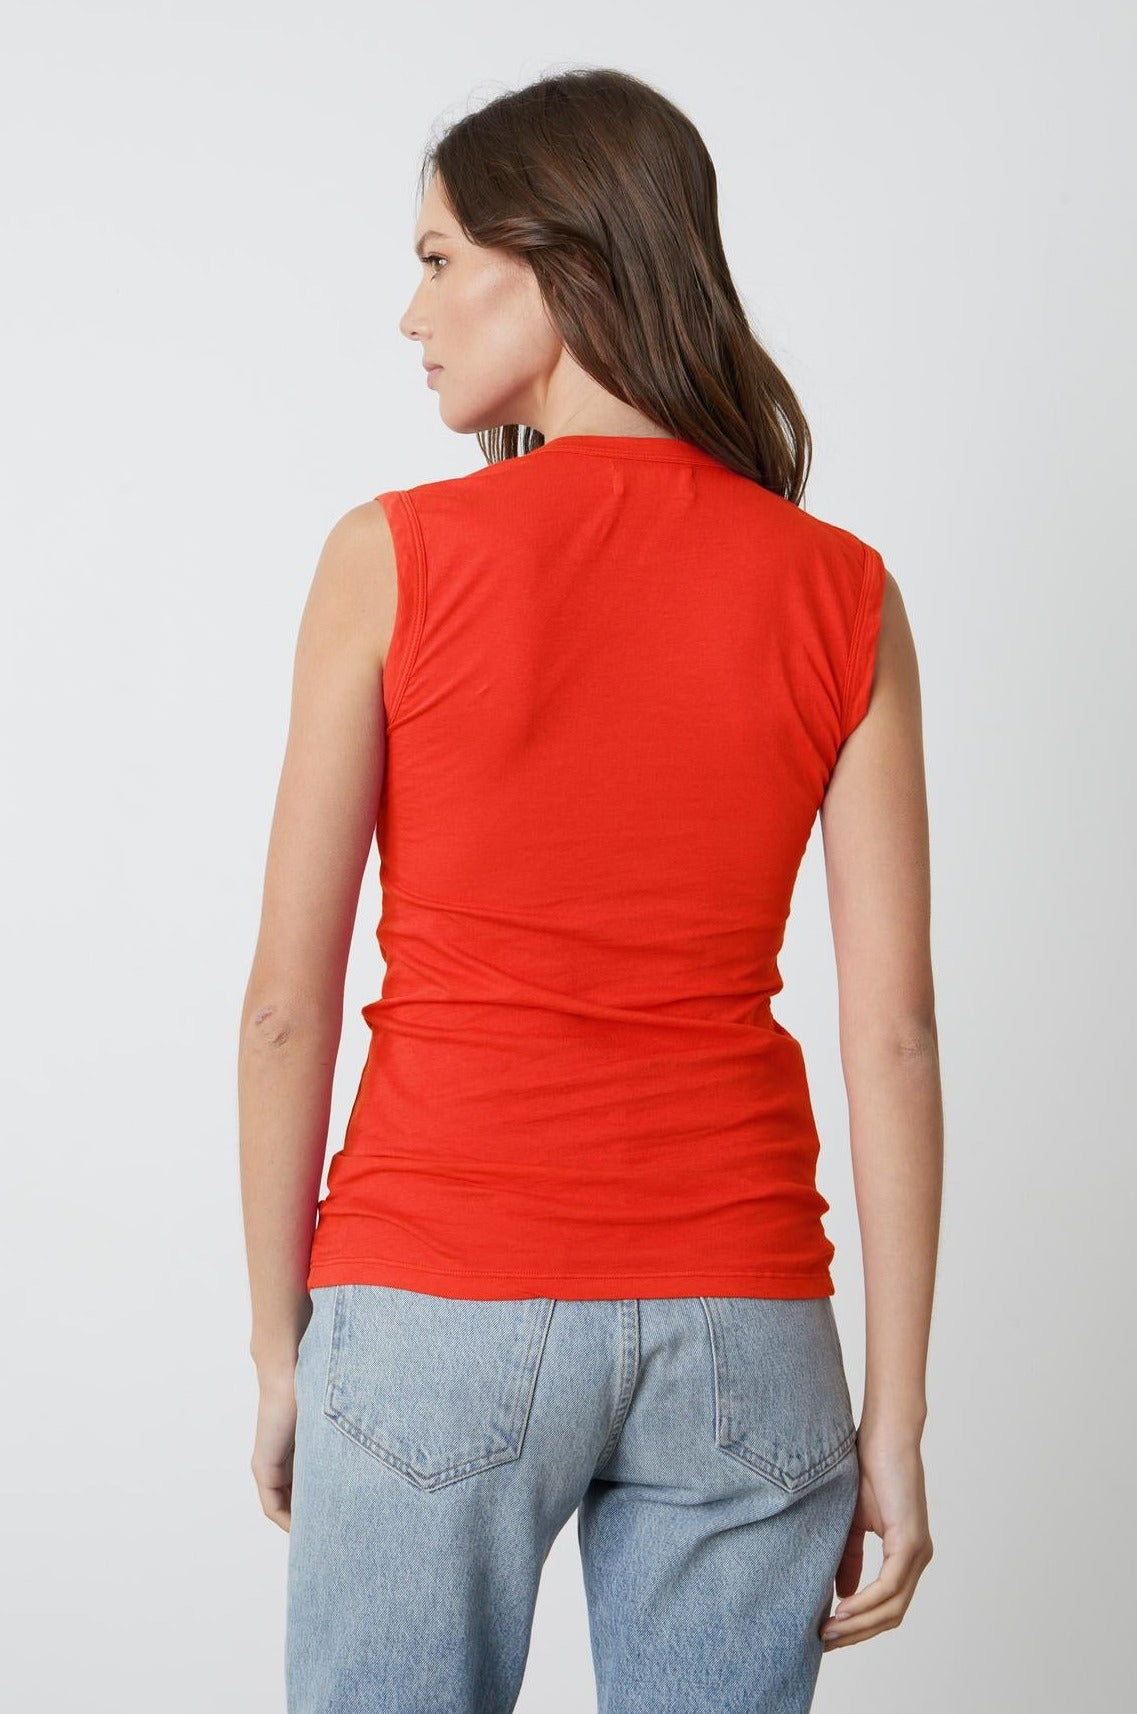 Estina Fitted Tank Top in bright cardinal red gauzy whisper with light blue denim back-26715129807041